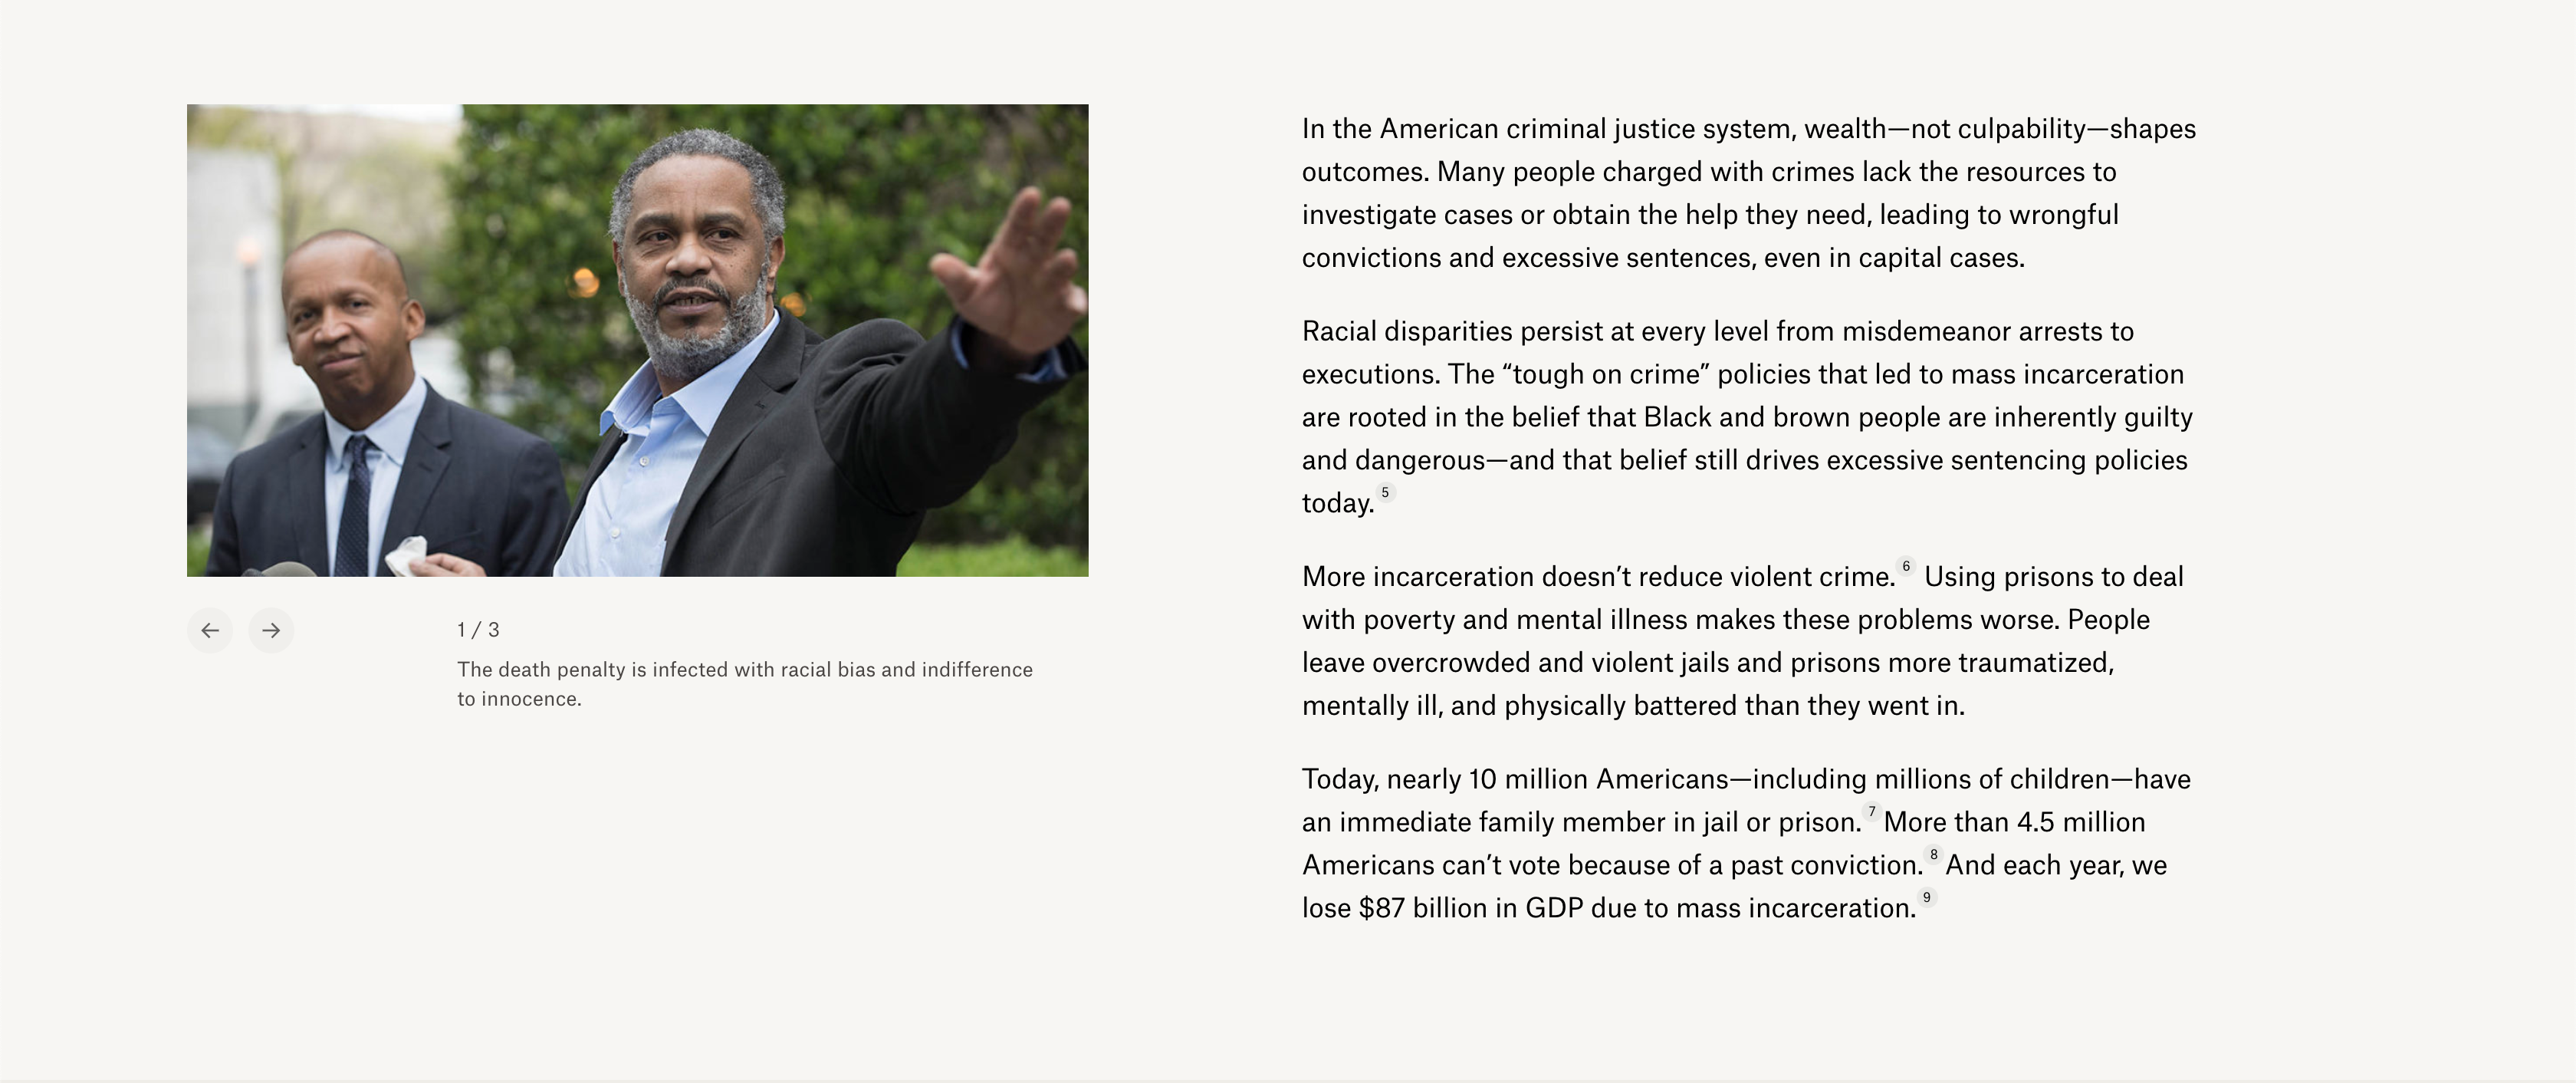 The Equal Justice Initiative uses photos of real people throughout their website to explain their issues